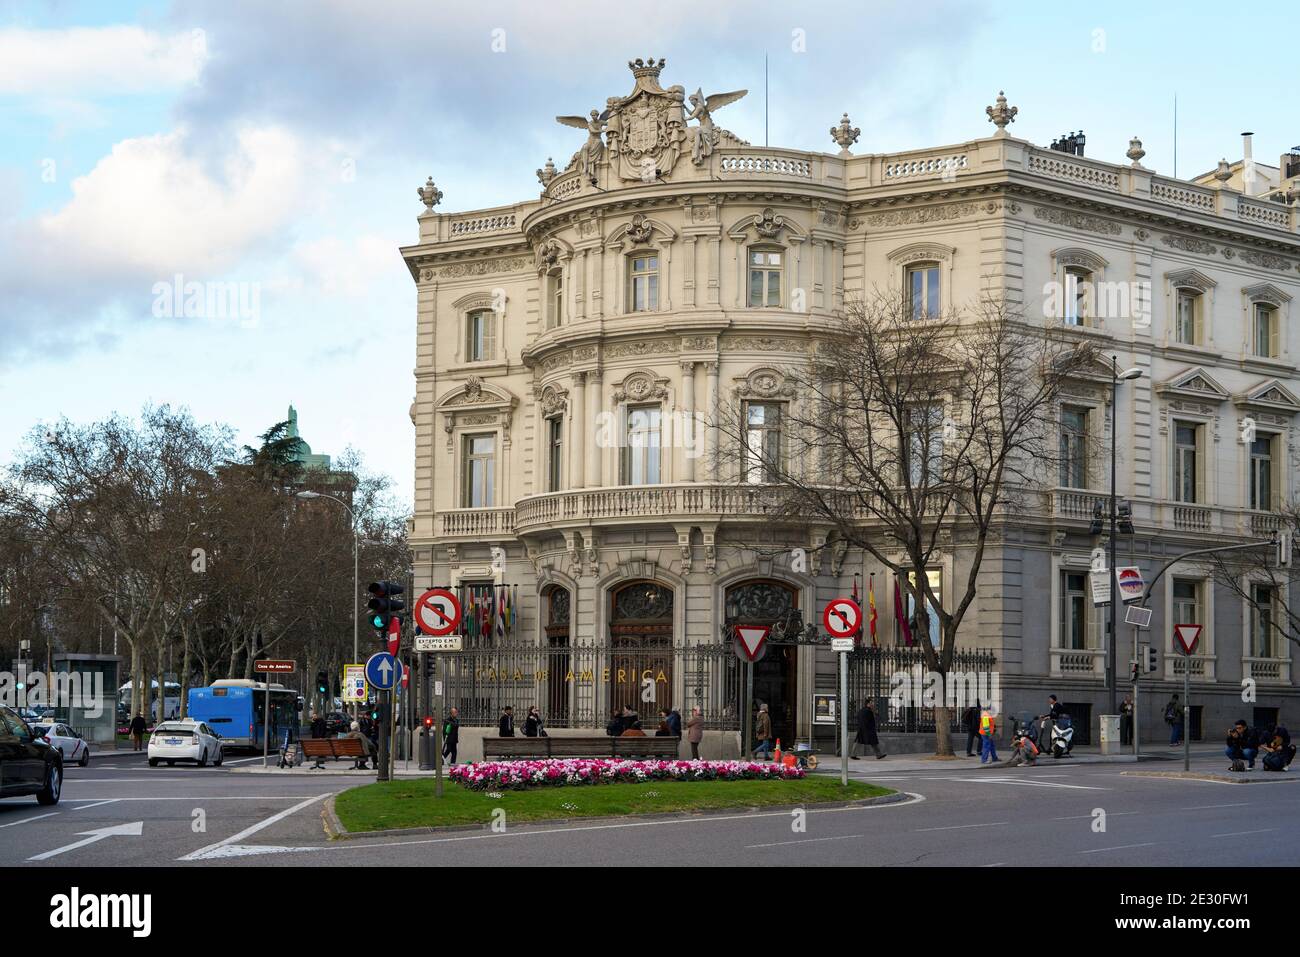 MADRID, SPAIN - MARCH 03, 2020: Palace of Linares at the Plaza de Cibeles in Madrid. It is the seat of the Casa de América, a cultural institution. Stock Photo